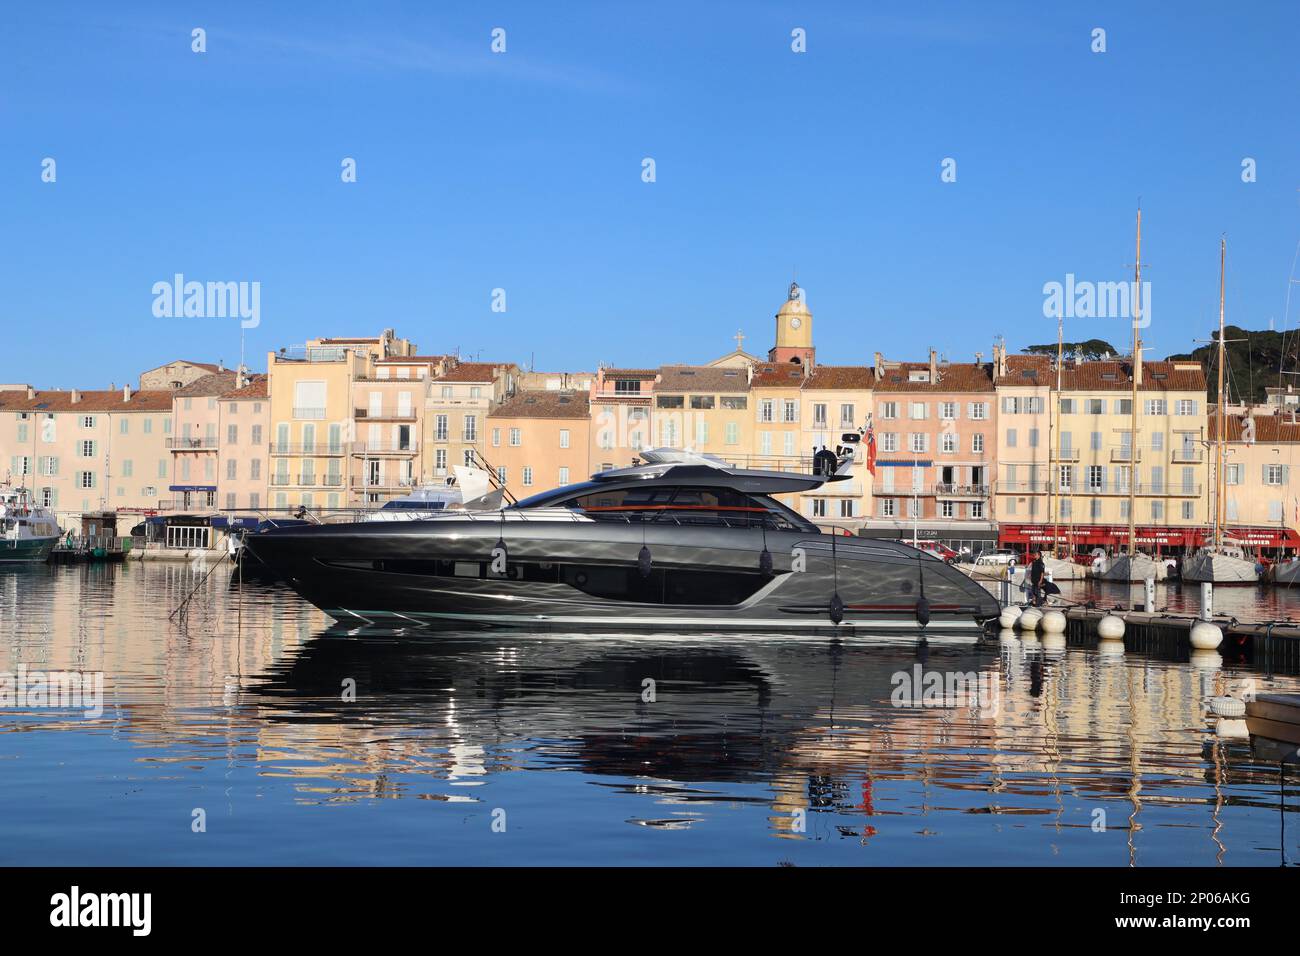 March 02th 2023. Saint-Tropez, France - Weather, summer heat Flowers of spring provence landscape. Sunbathing at La Plage Tropezina, walking in the old fishing village BB and Romy are symbols in the shop windows. Credit Ilona Barna BIPHOTONEWS, Alamy Live News Stock Photo